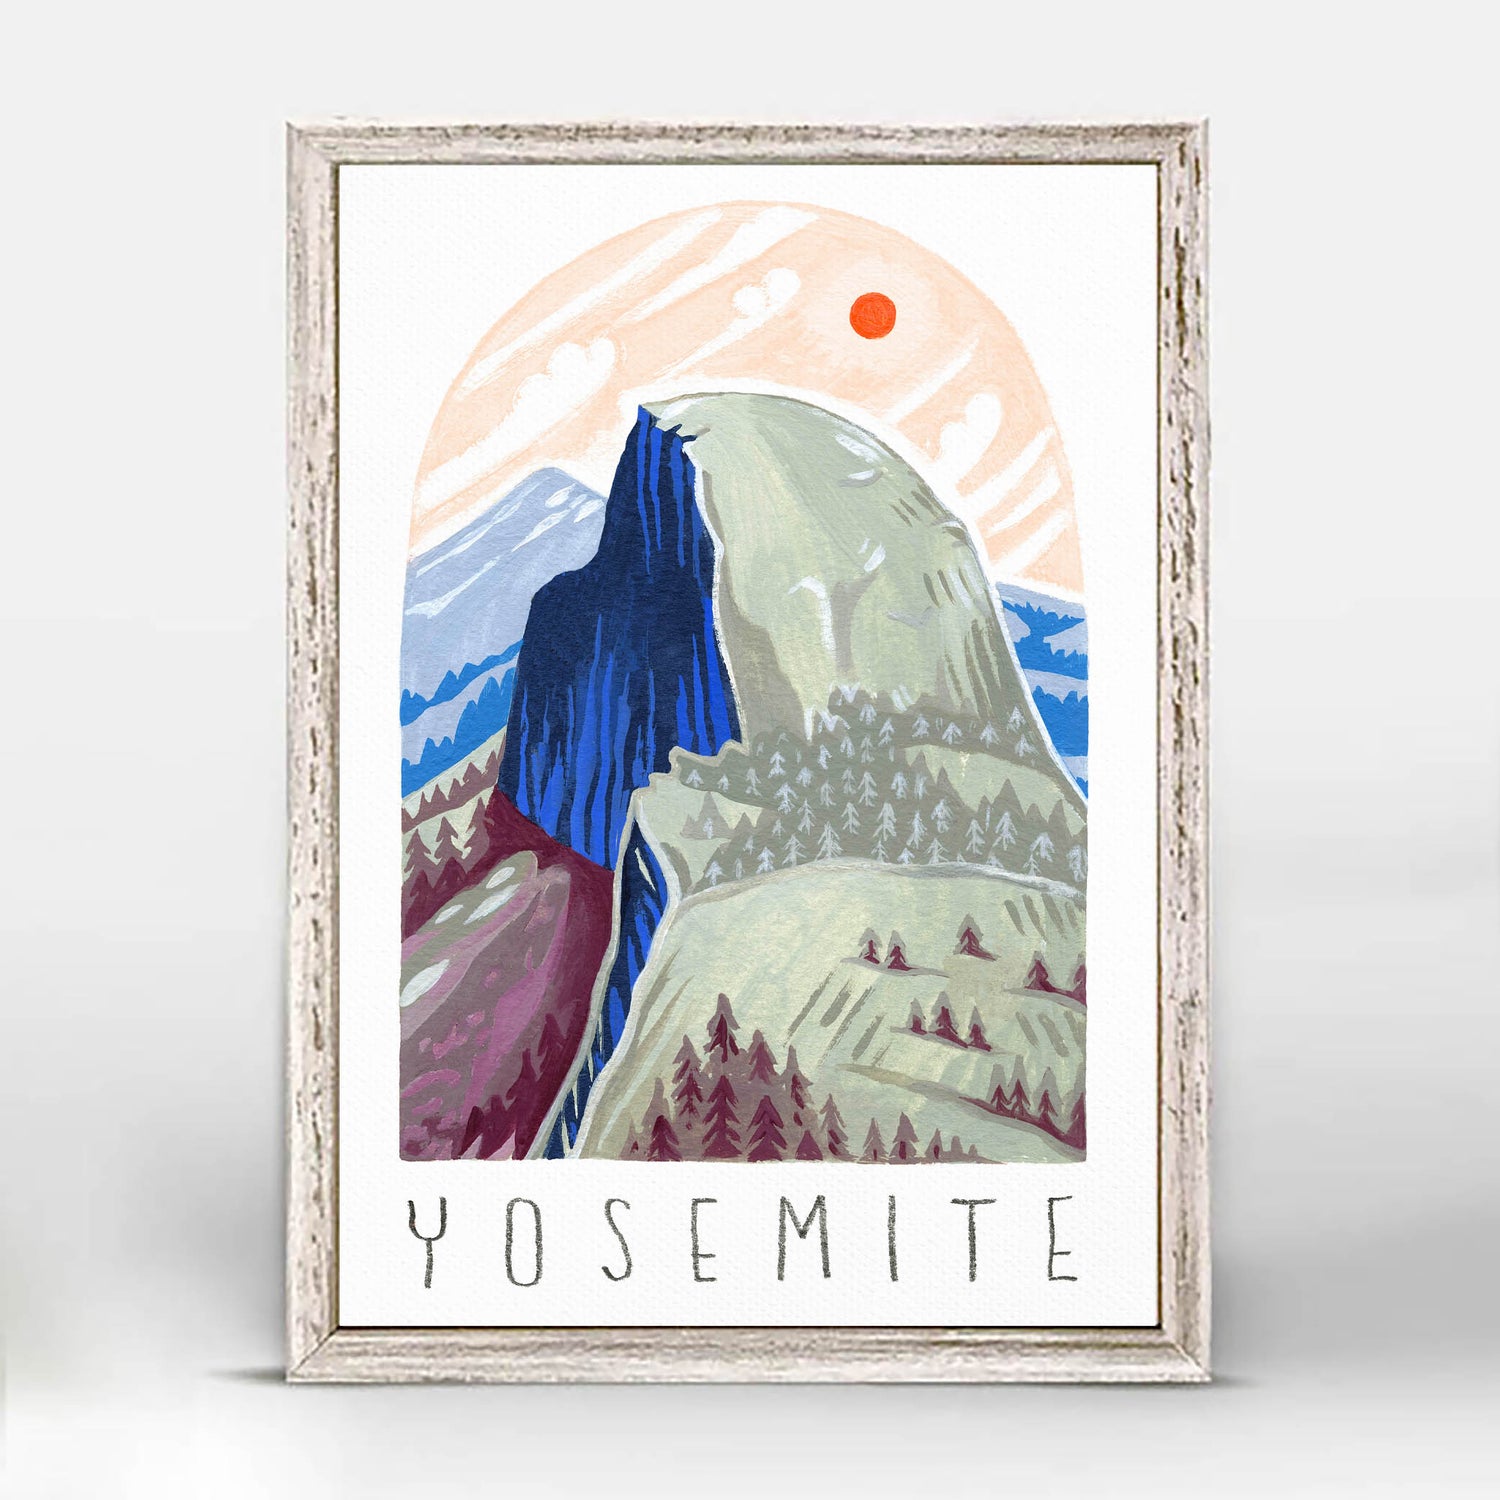 Yosemite National Park art with Half Dome and sunset; trendy illustration by Angela Staehling